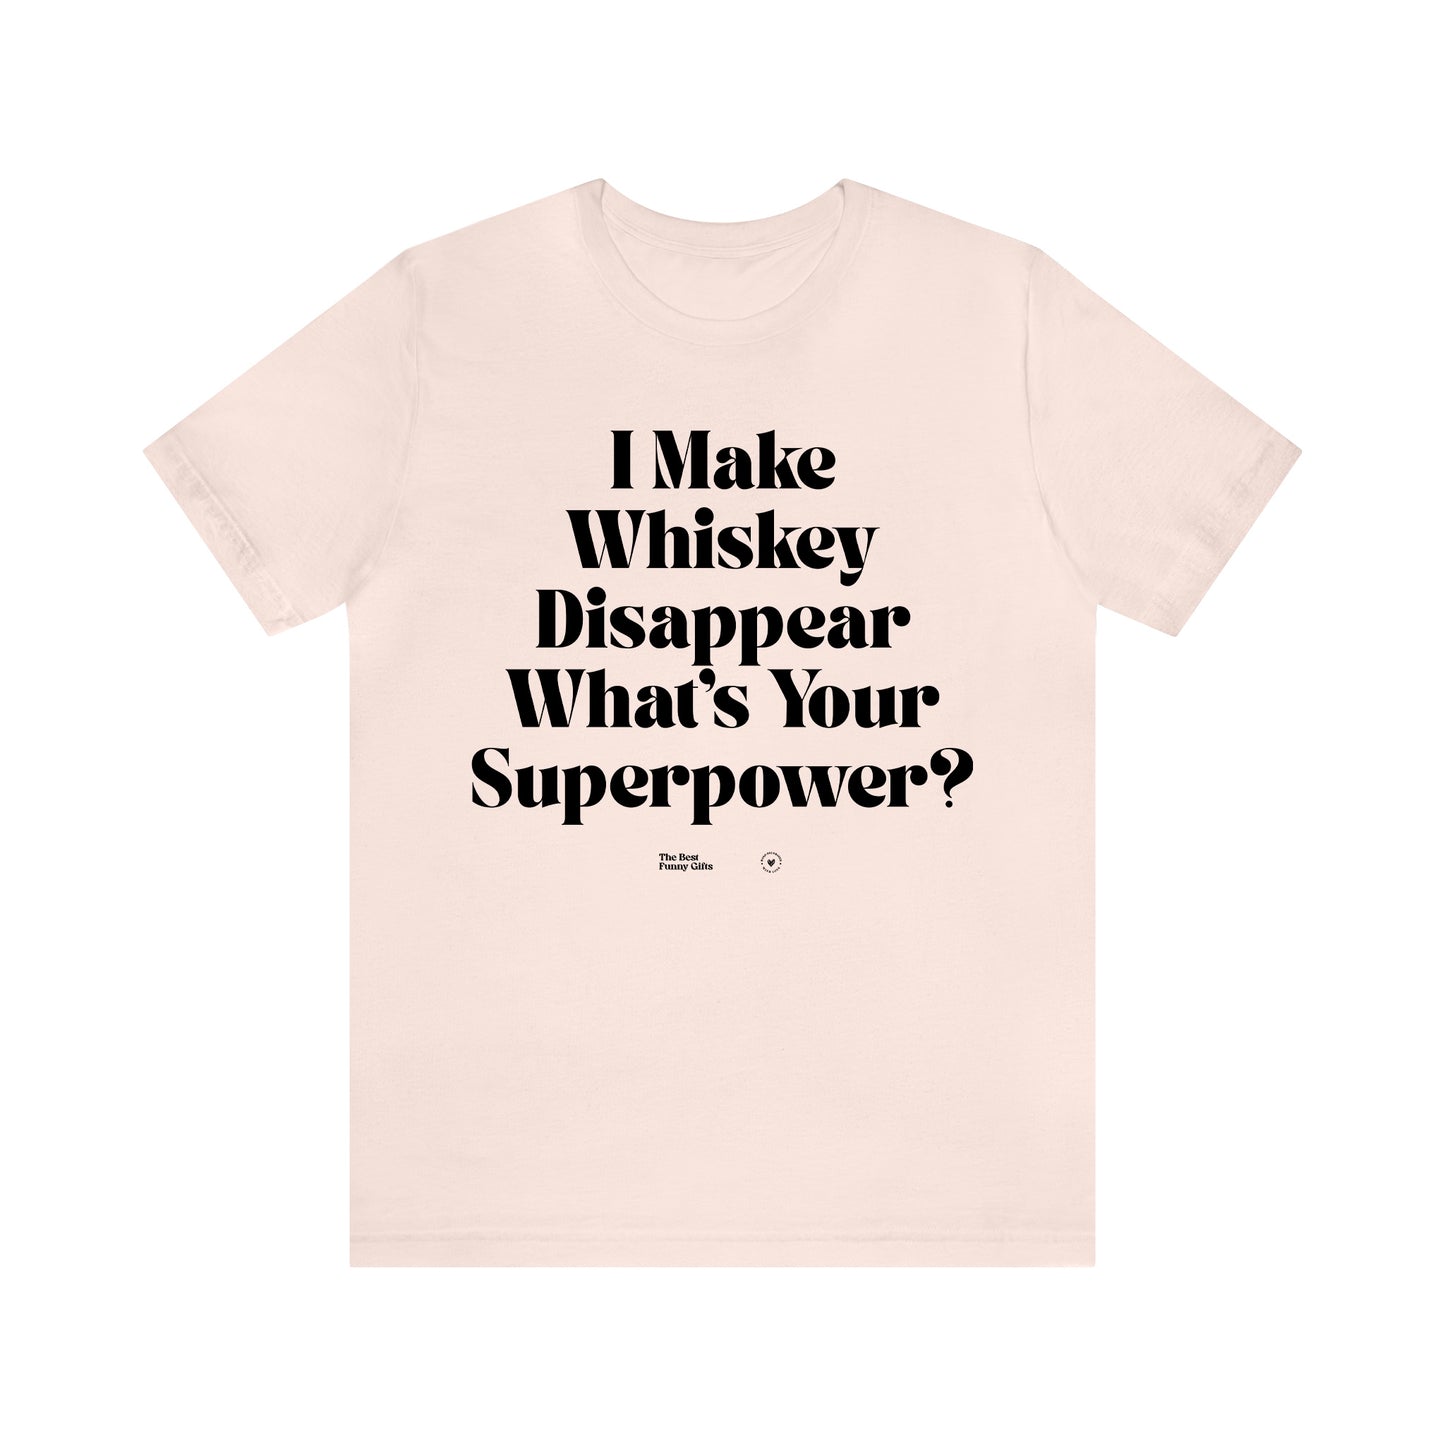 Funny Shirts for Women - I Make Whiskey Disappear What's Your Superpower? - Women’s T Shirts